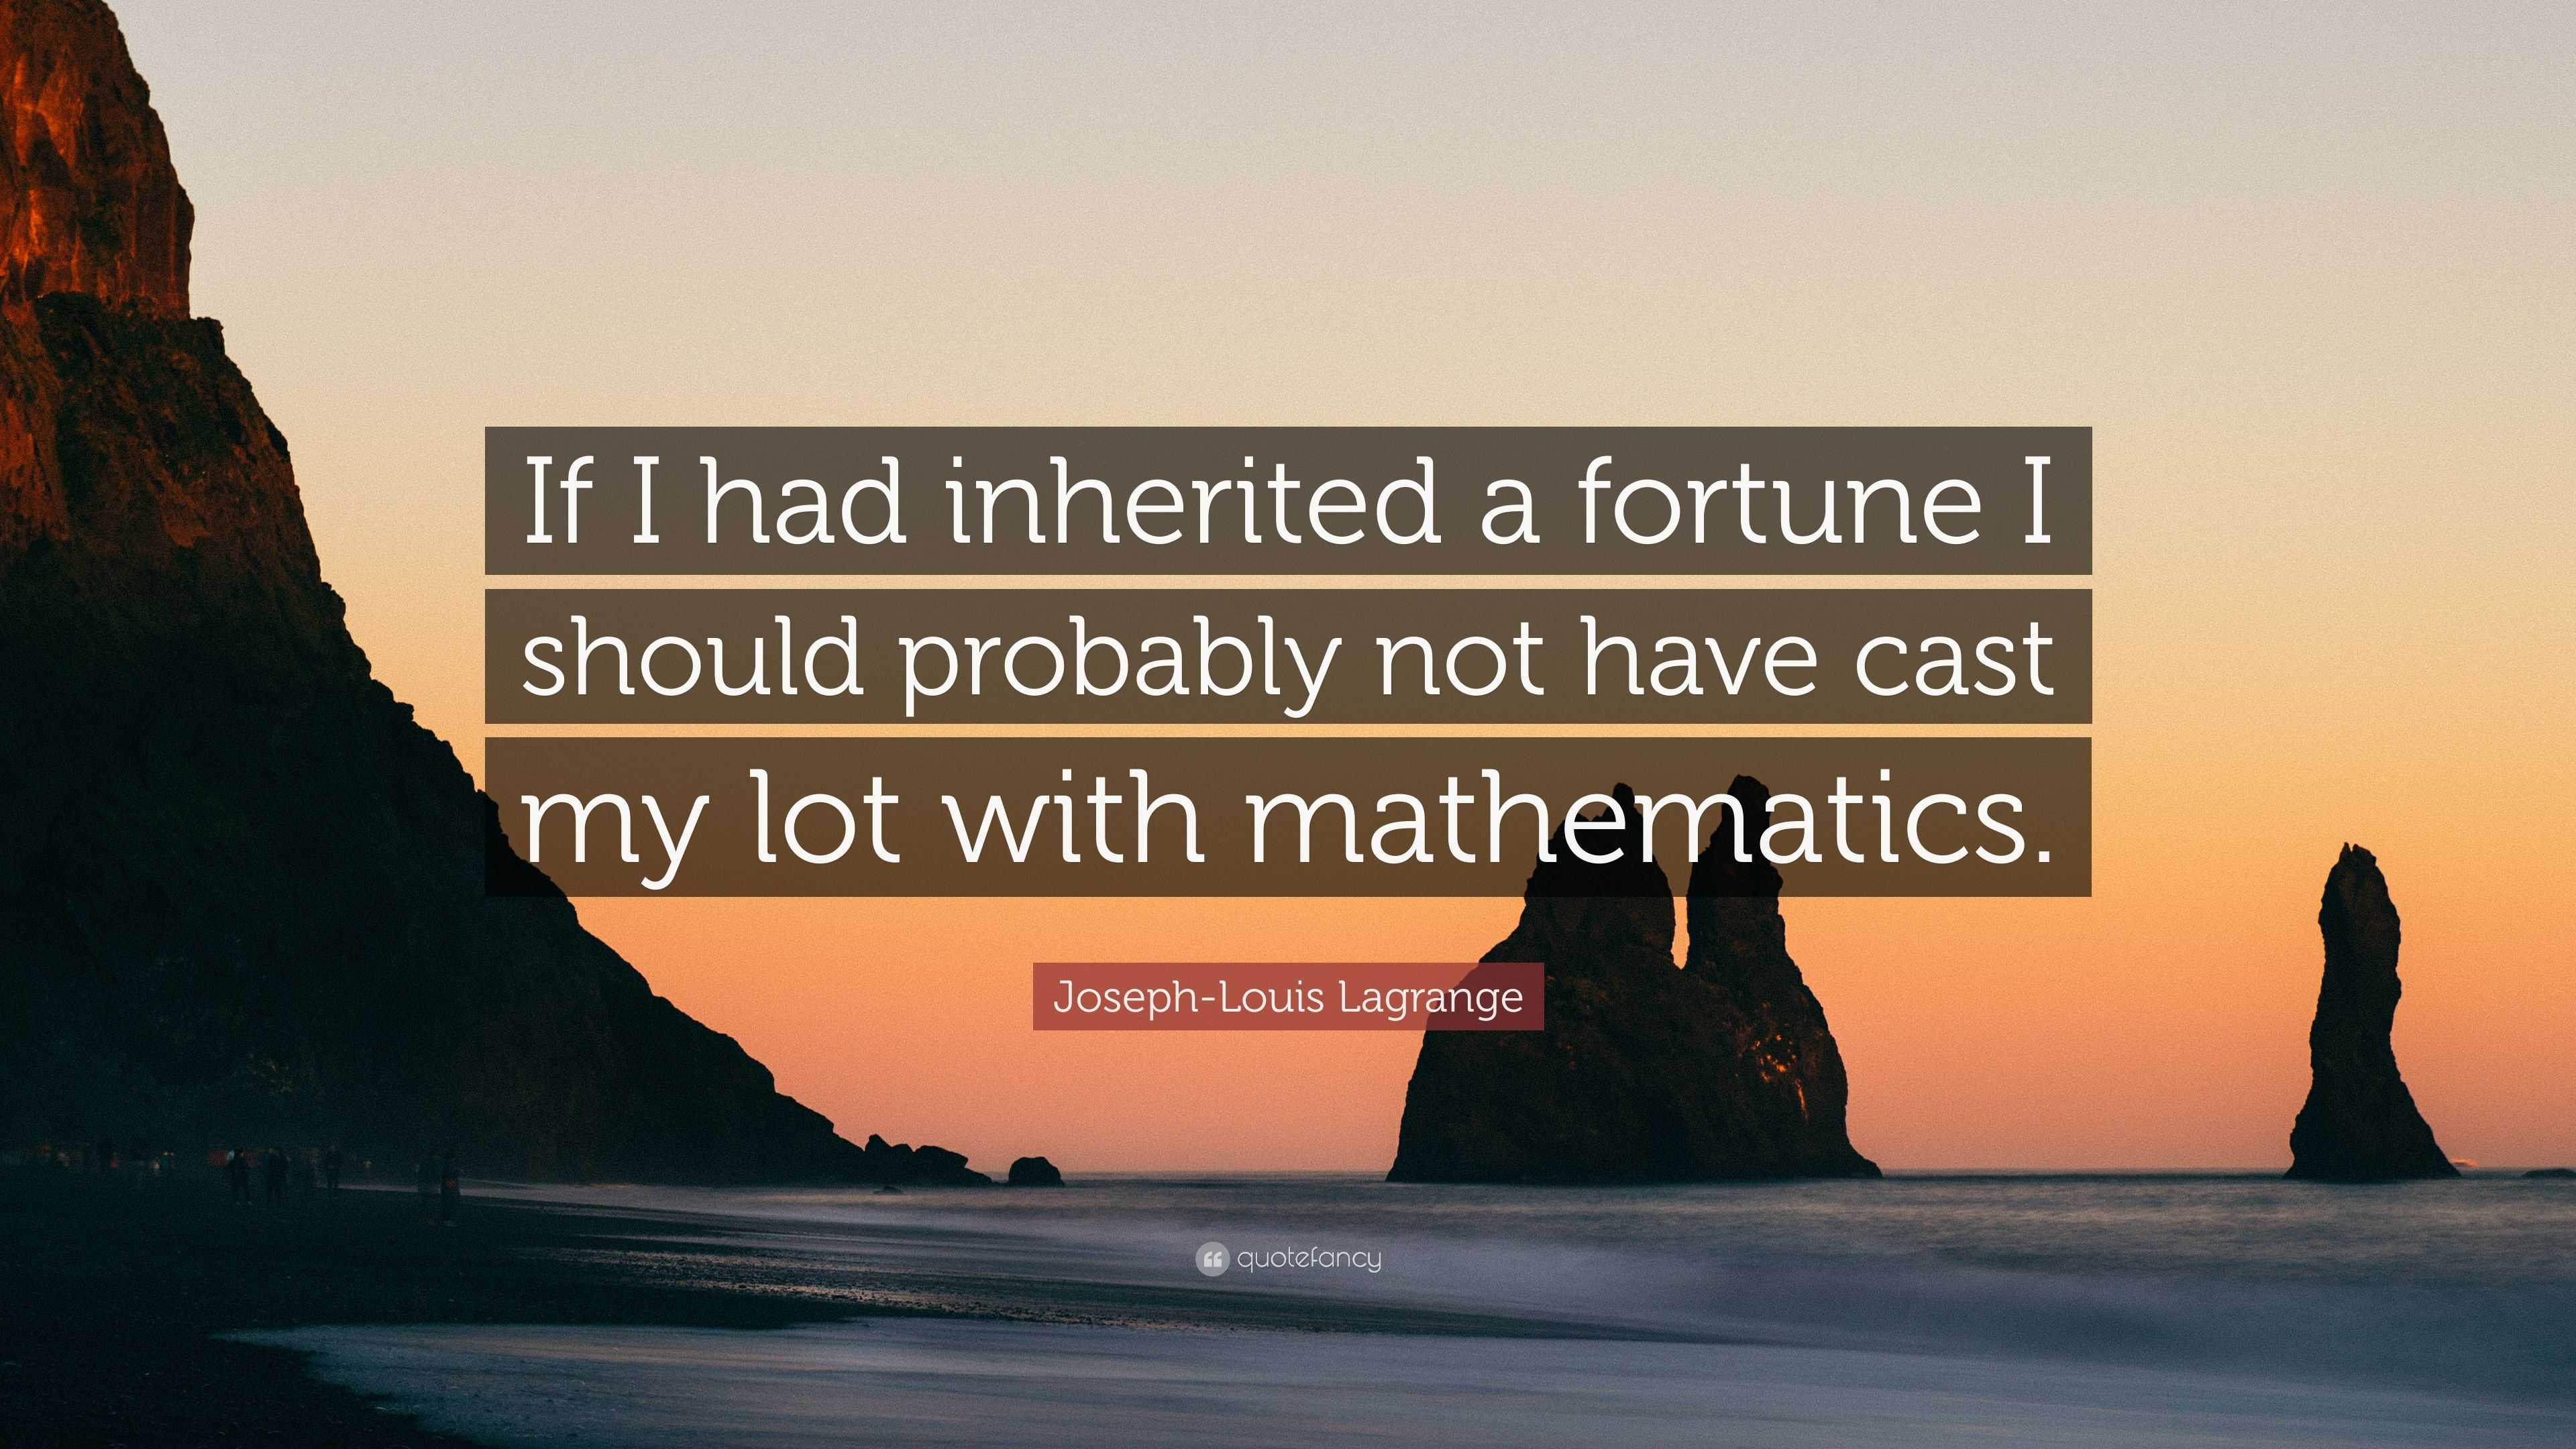 Joseph-Louis Lagrange quote: If I had inherited a fortune I should probably  not